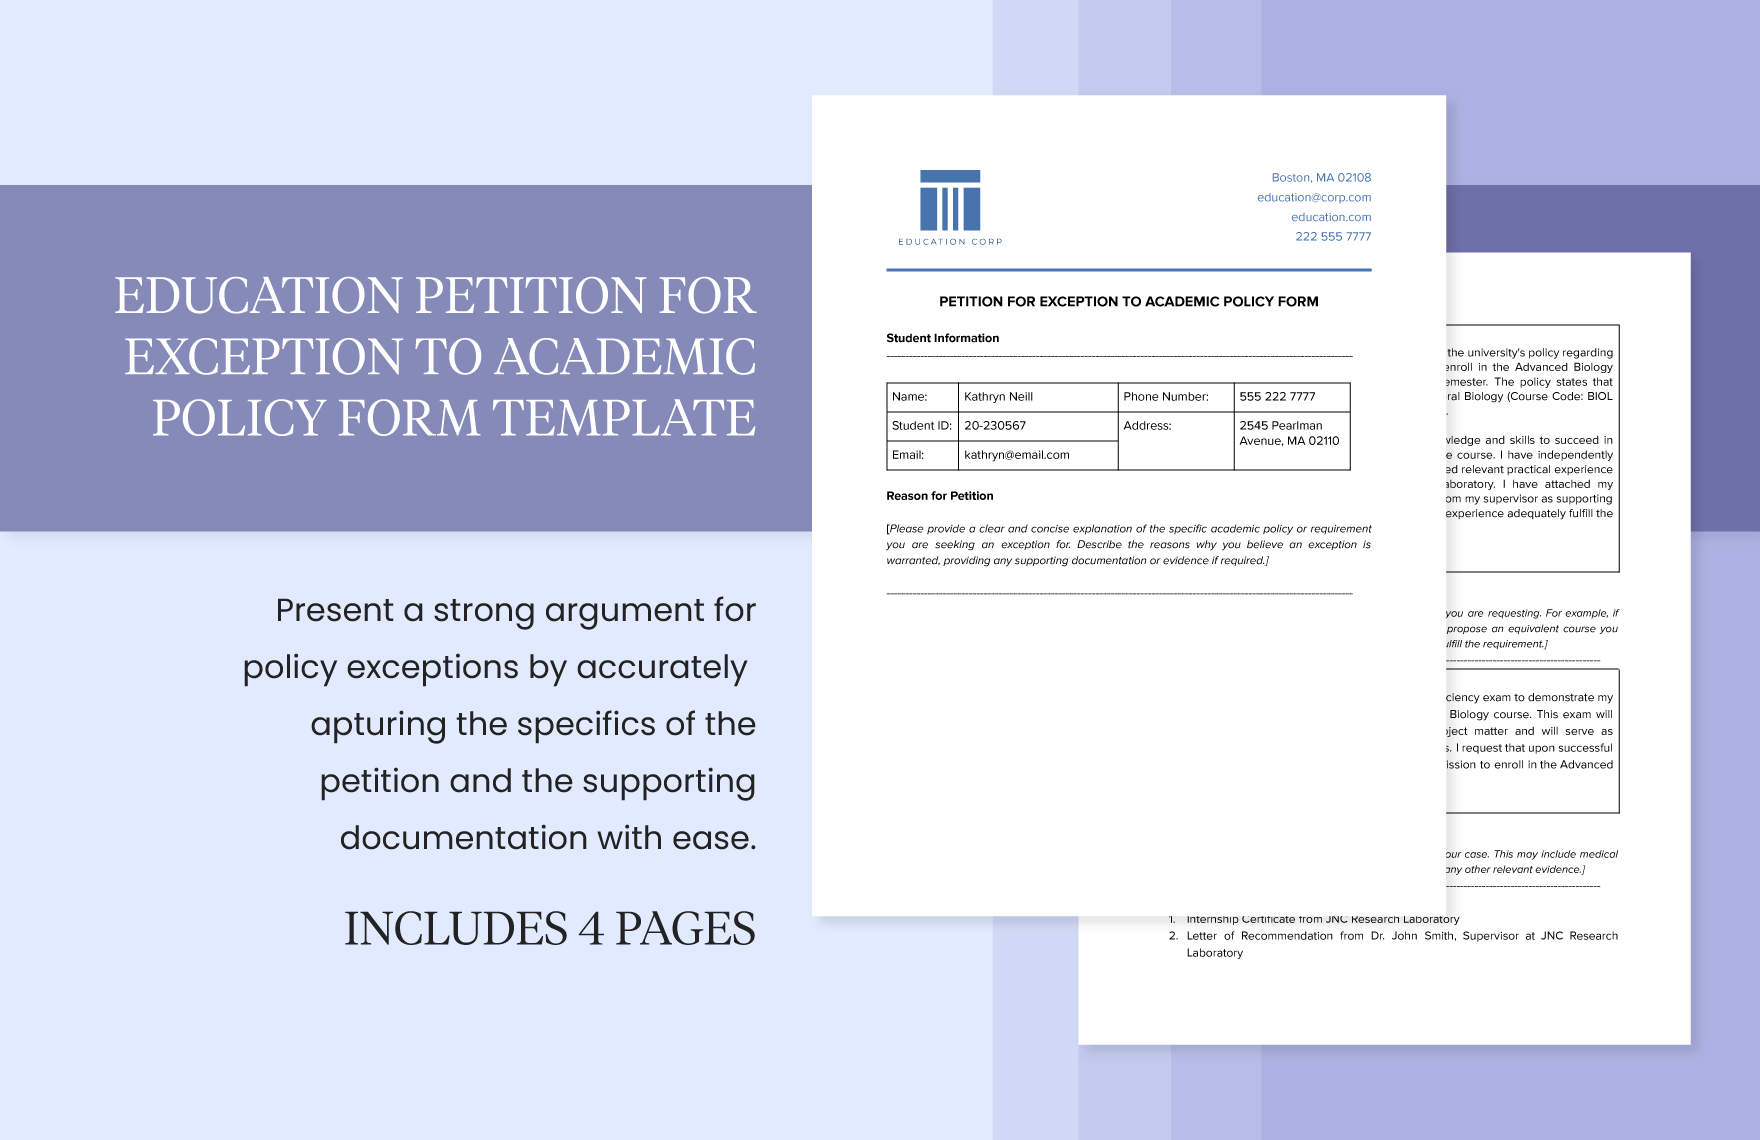 Education Petition for Exception to Academic Policy Form Template